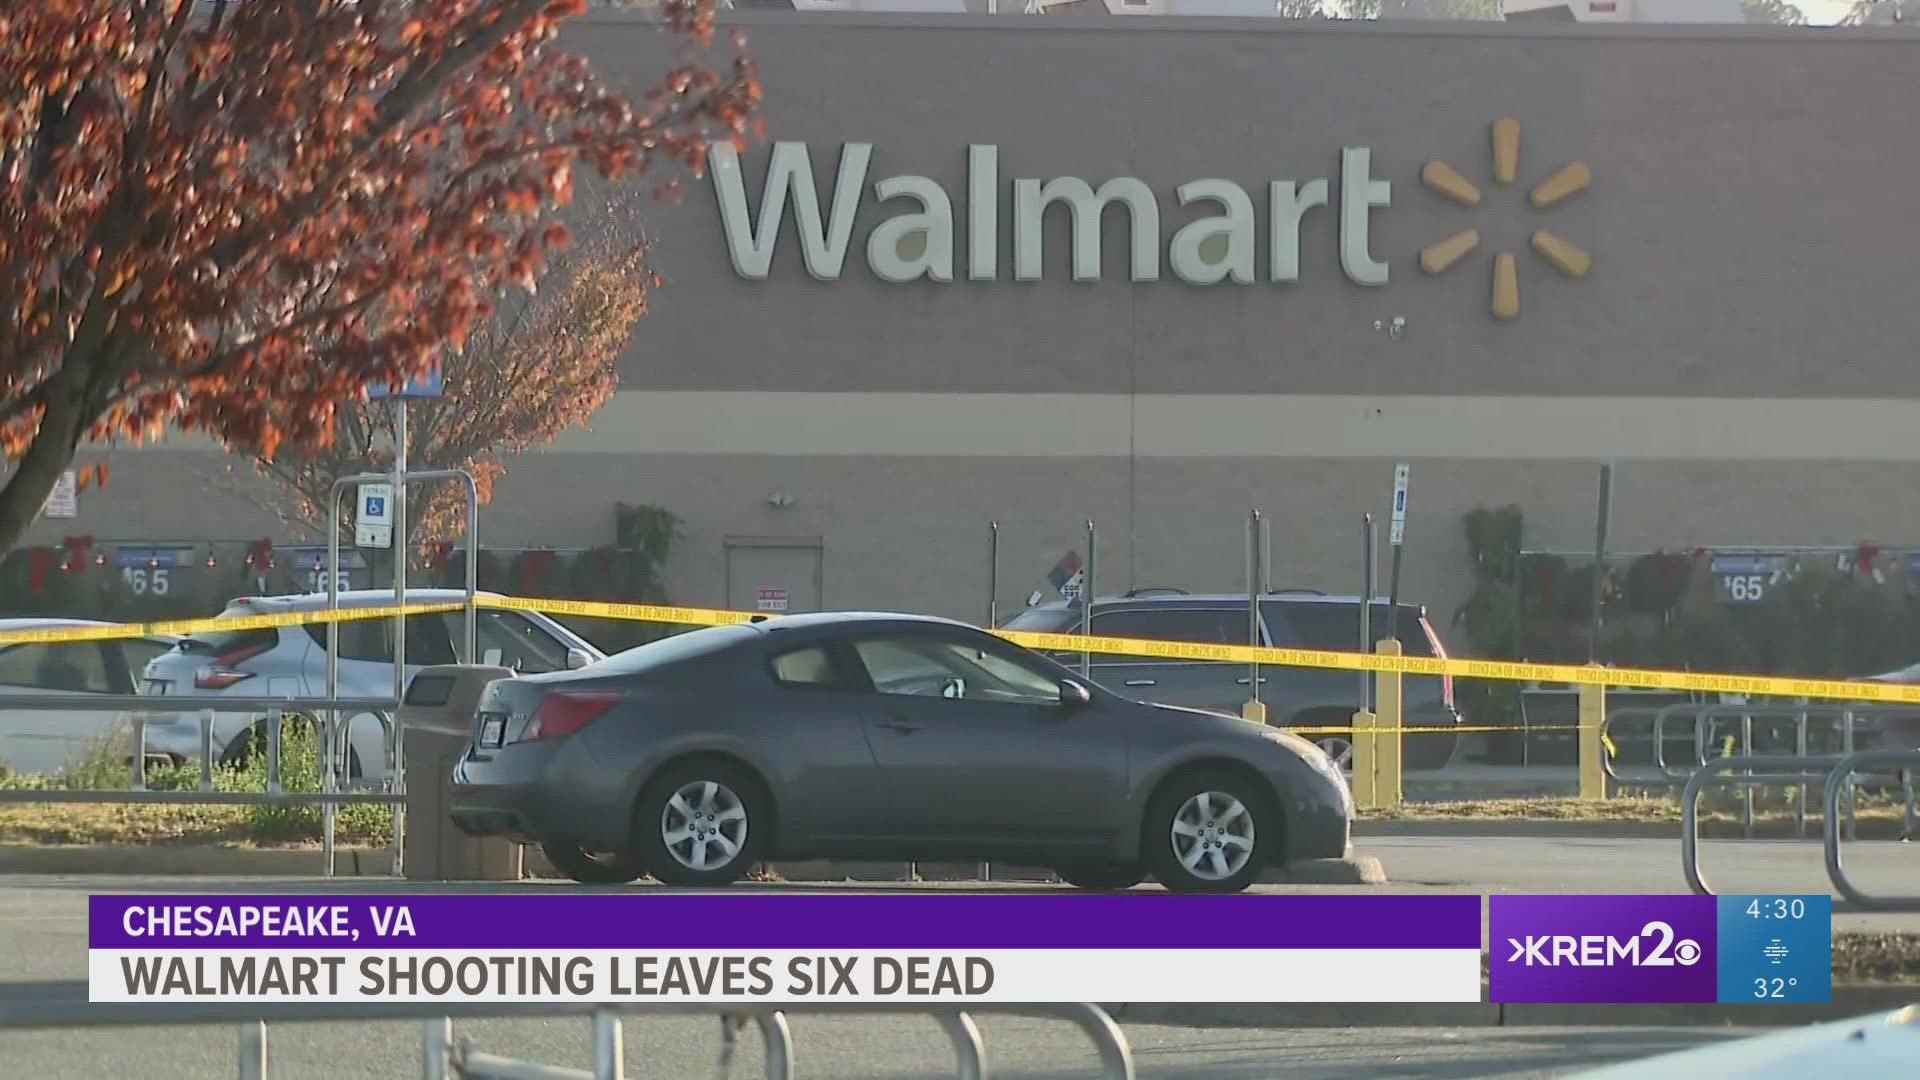 Police say six people and the shooter are dead after a shooting at a Walmart in Virginia. It was the second high-profile shooting in a handful of days.